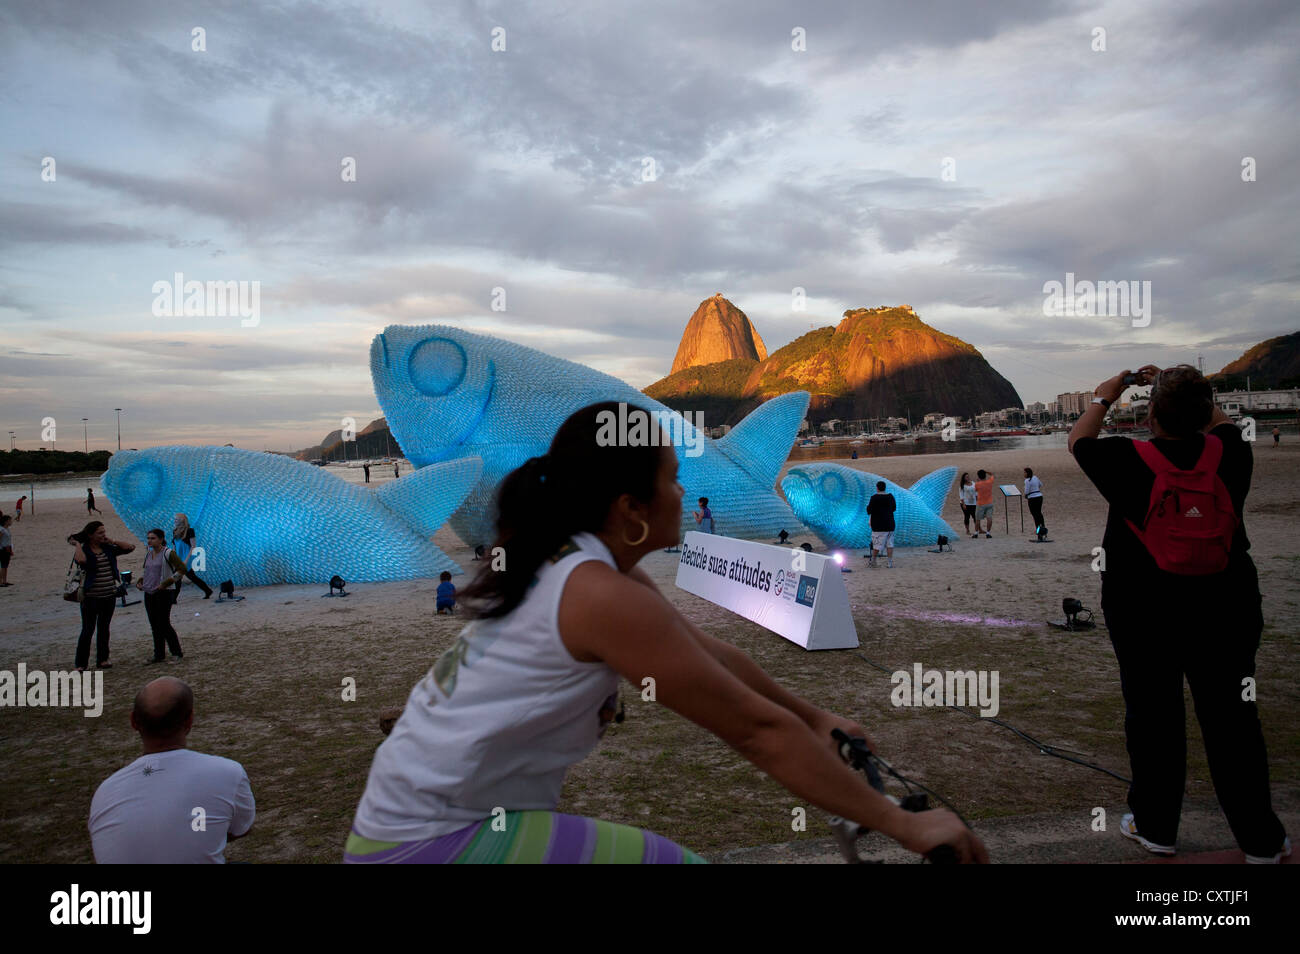 Giant Illuminated Fish made from Plastic Bottles on Botafogo Beach during Rio+20 Conference Rio de Janeiro Brazil Stock Photo